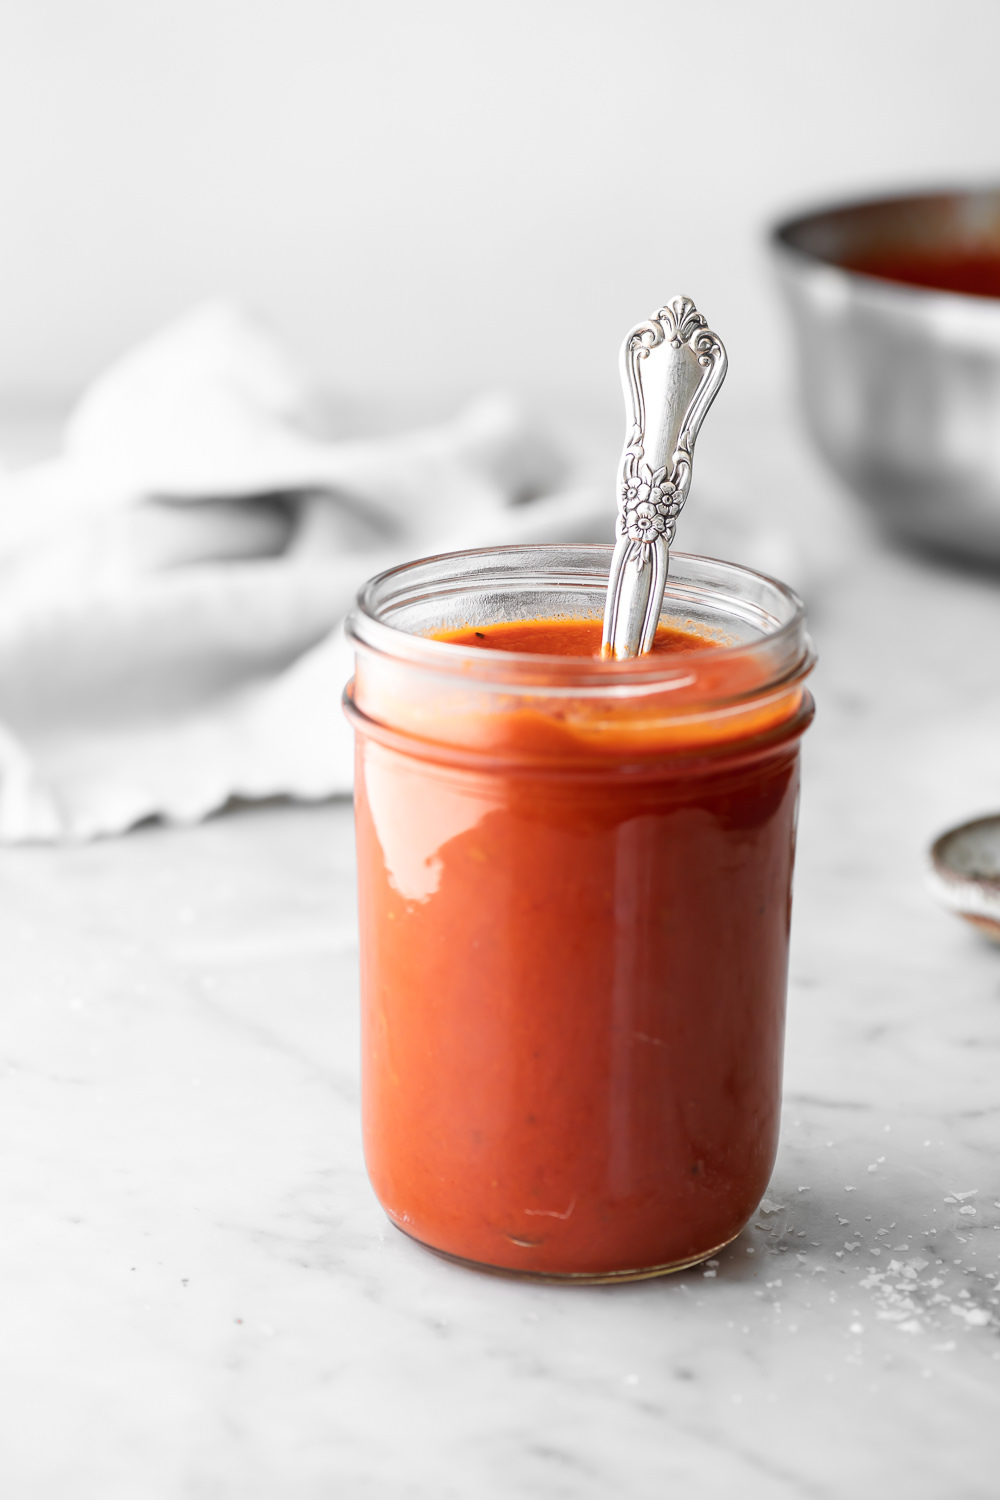 Quick and Easy Homemade Pizza Sauce Recipe - The Food Charlatan